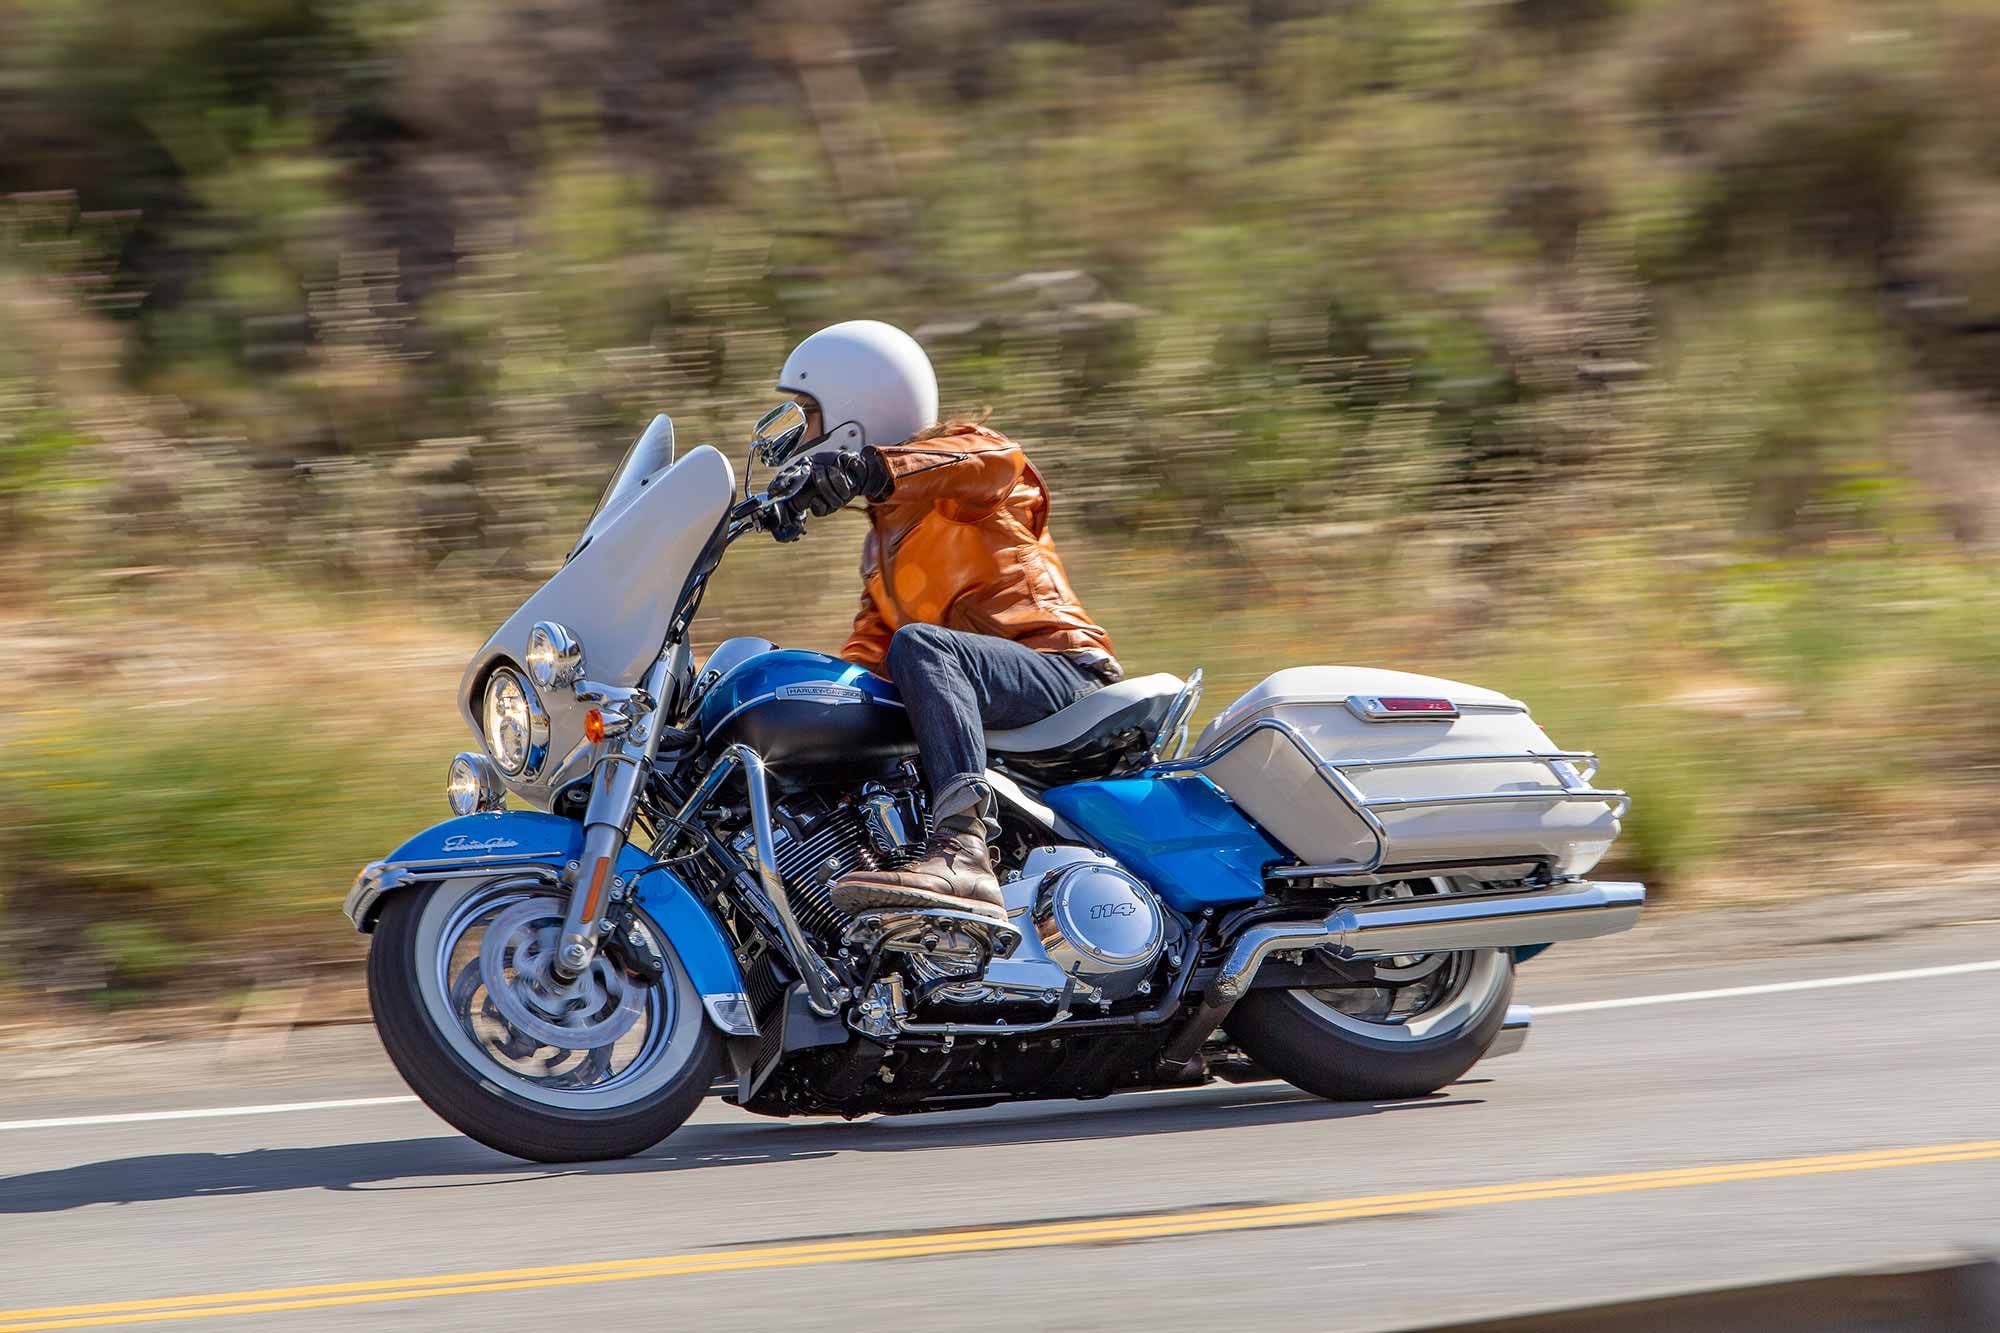 Classic style and modern performance-The Electra Glide Revival is an easy-to-assess machine.